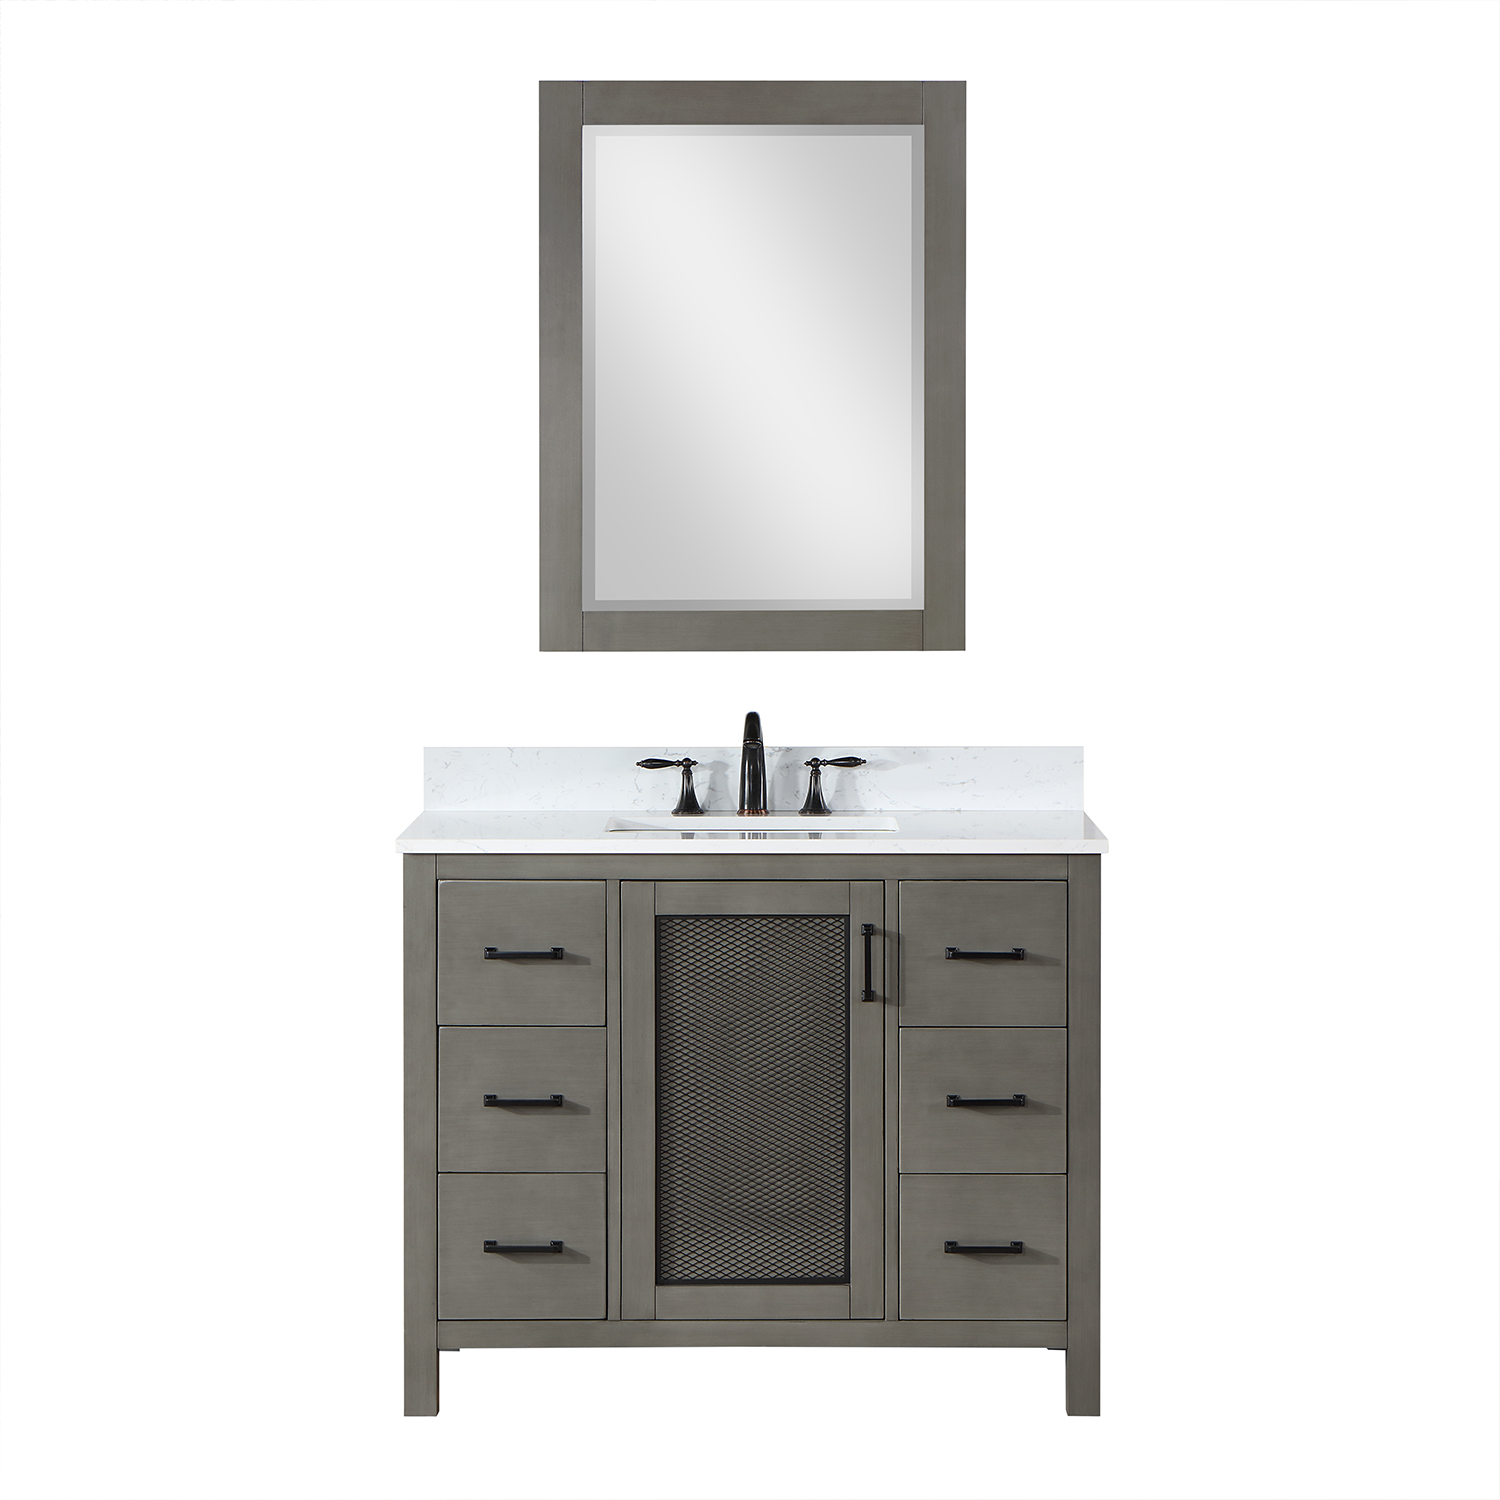 Issac Edwards Collection 42" Single Bathroom Vanity Set in Gray Pine with Carrara White Composite Stone Countertop without Mirror 